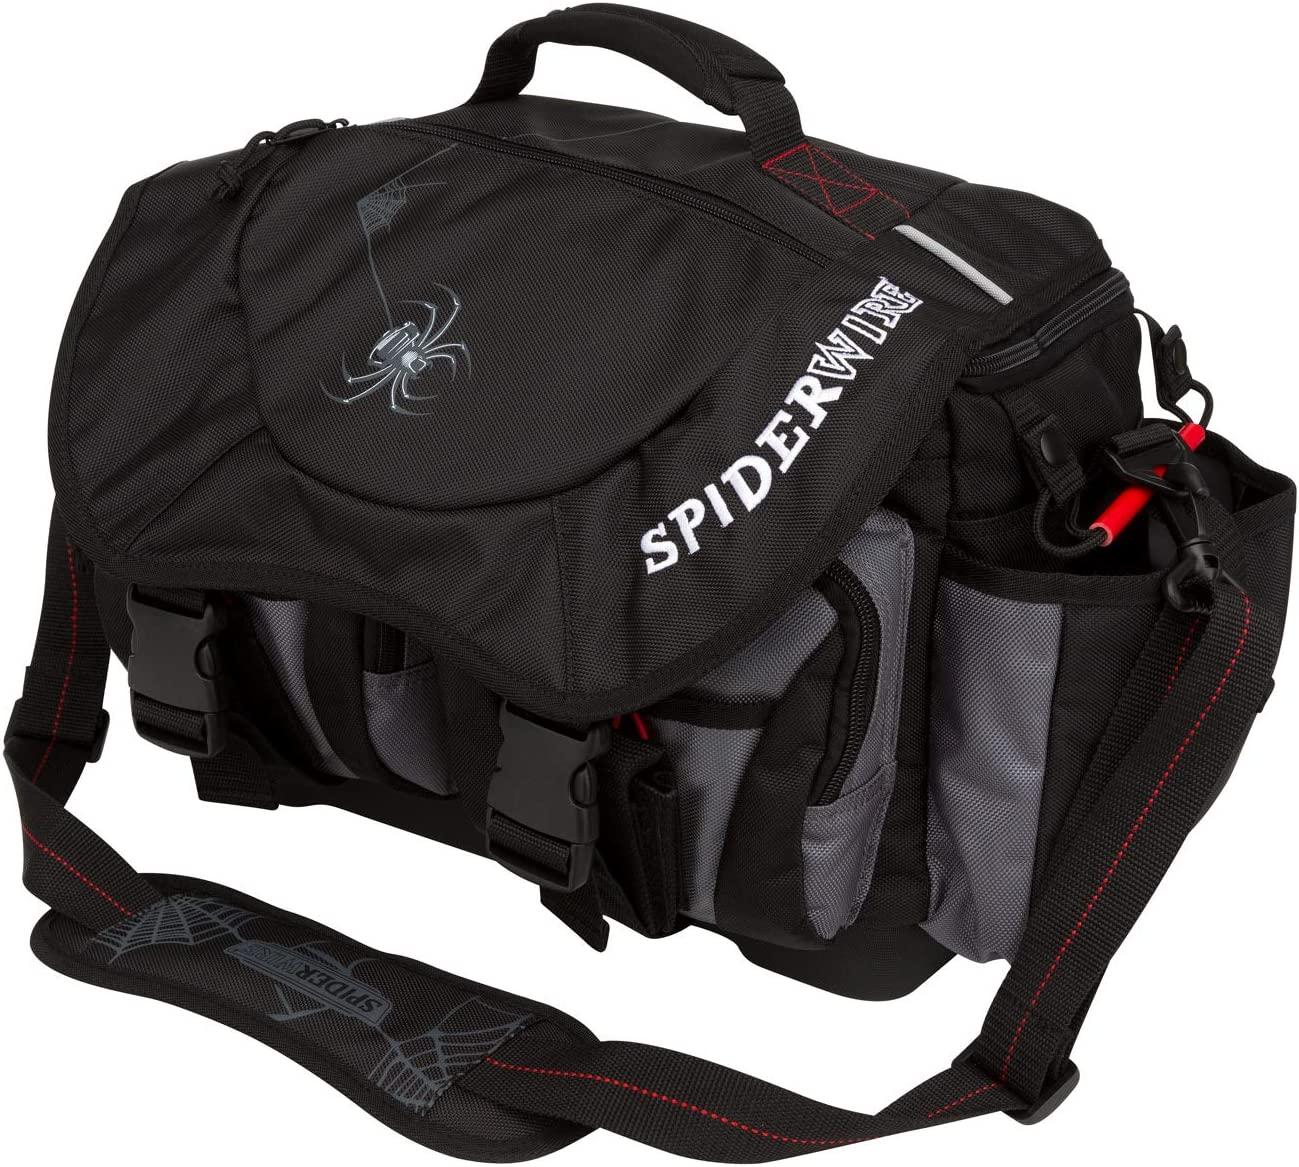 Spiderwire Spider Wire Fishing Backpack - Sports & outdoors, Color: Black